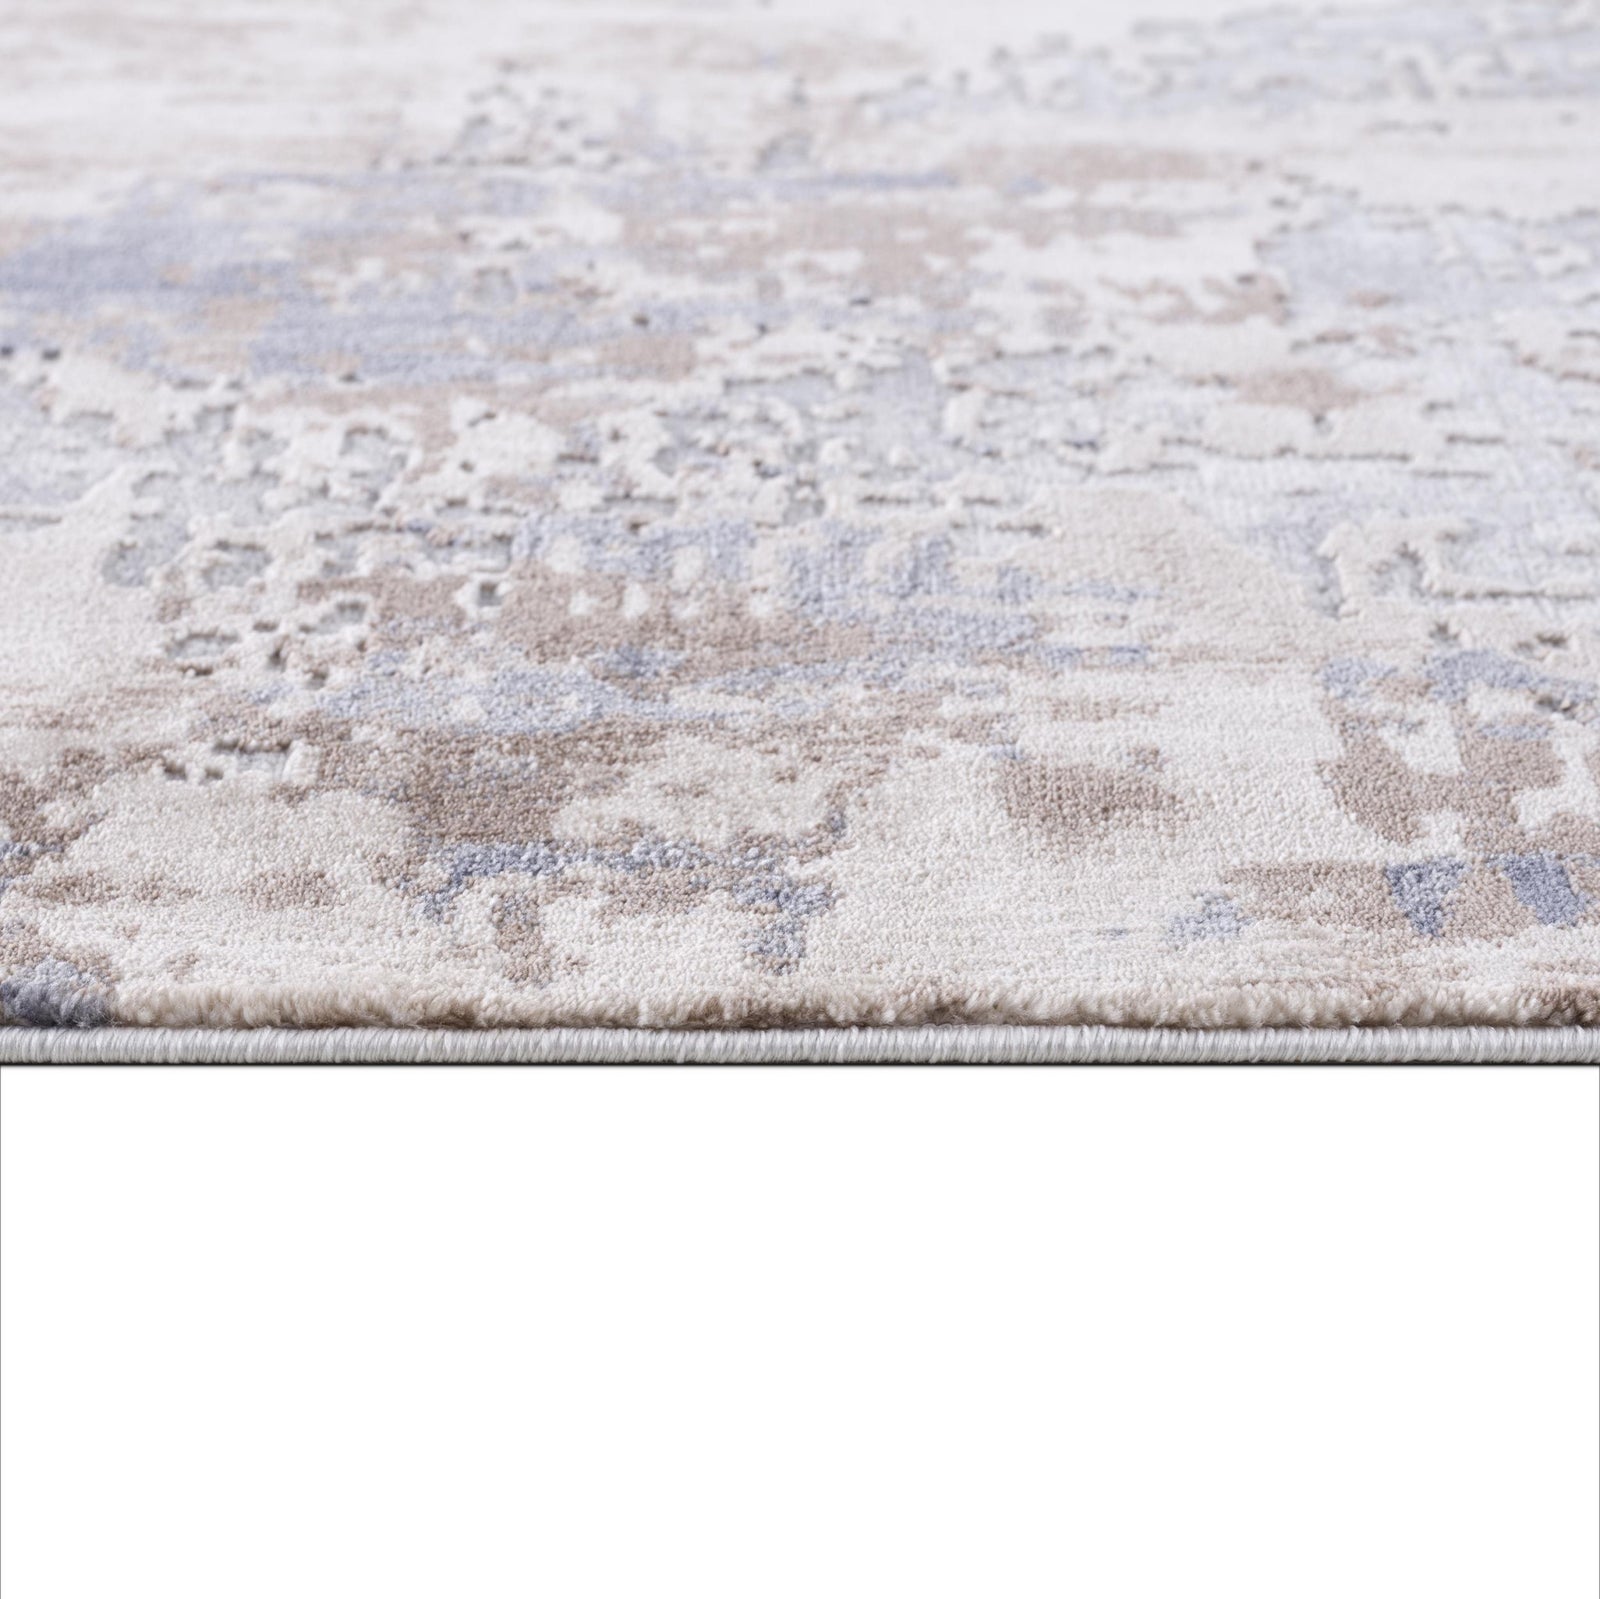 3’ X 5’ Beige And Ivory Abstract Area Rug